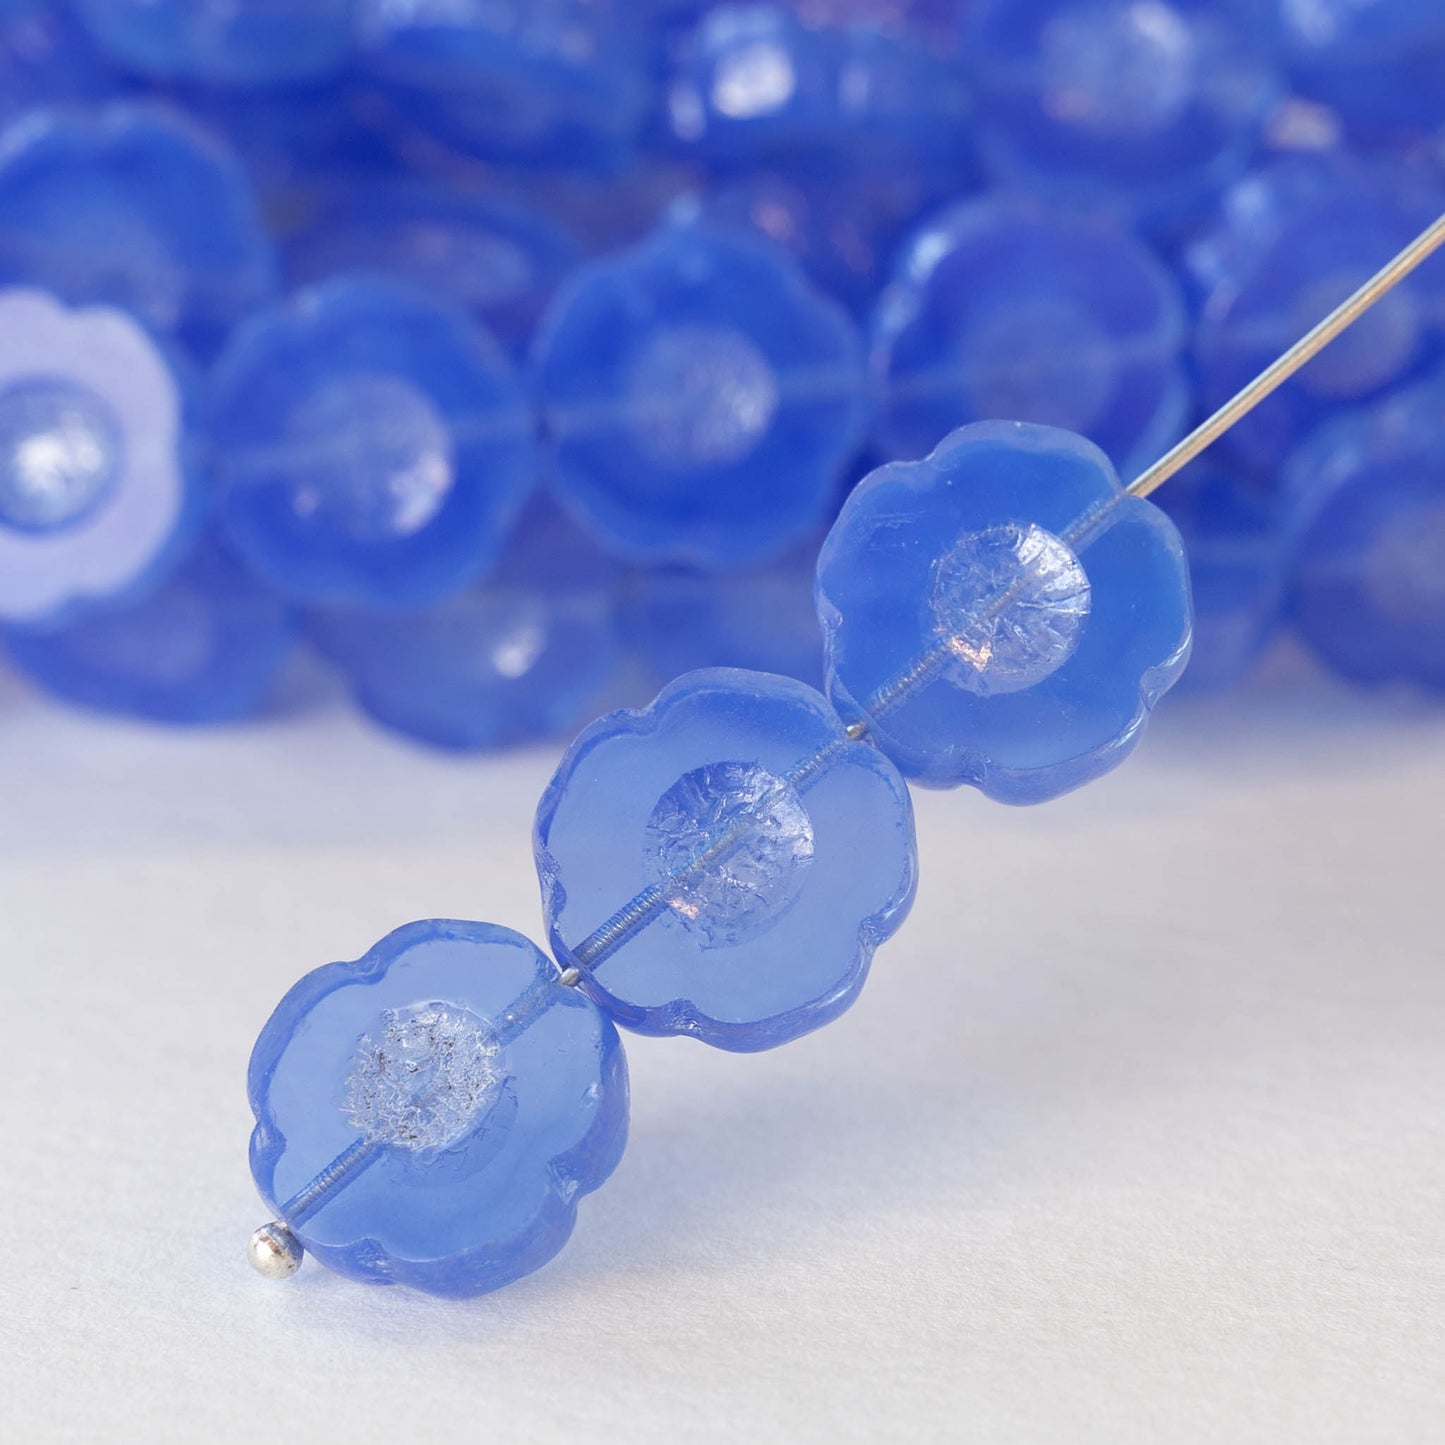 glass beads for jewelry making 14mm